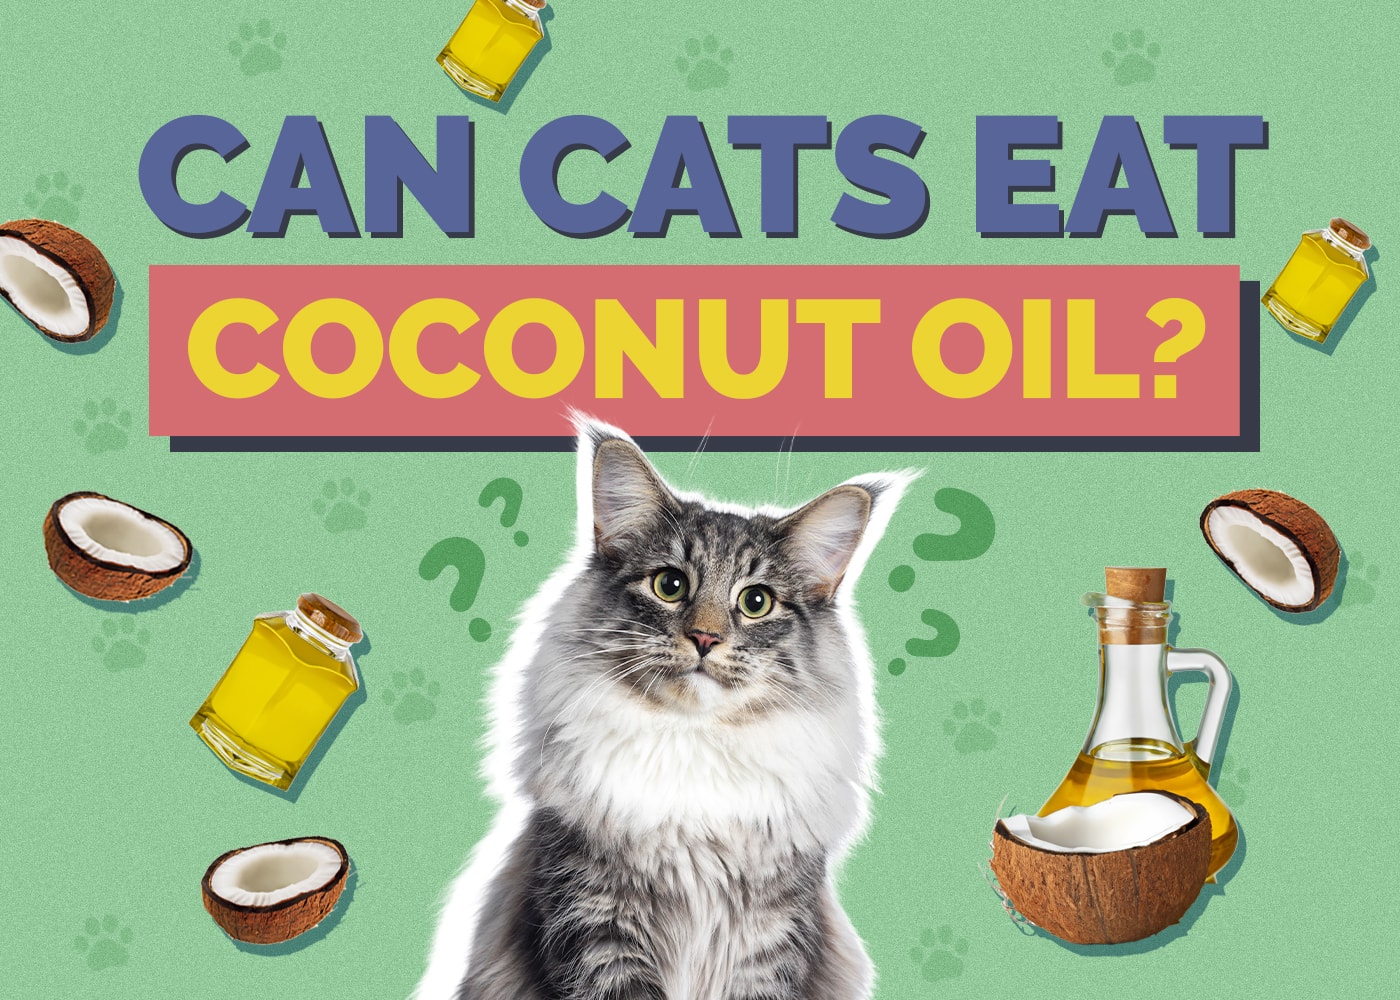 Can Cats Eat coconut-oil